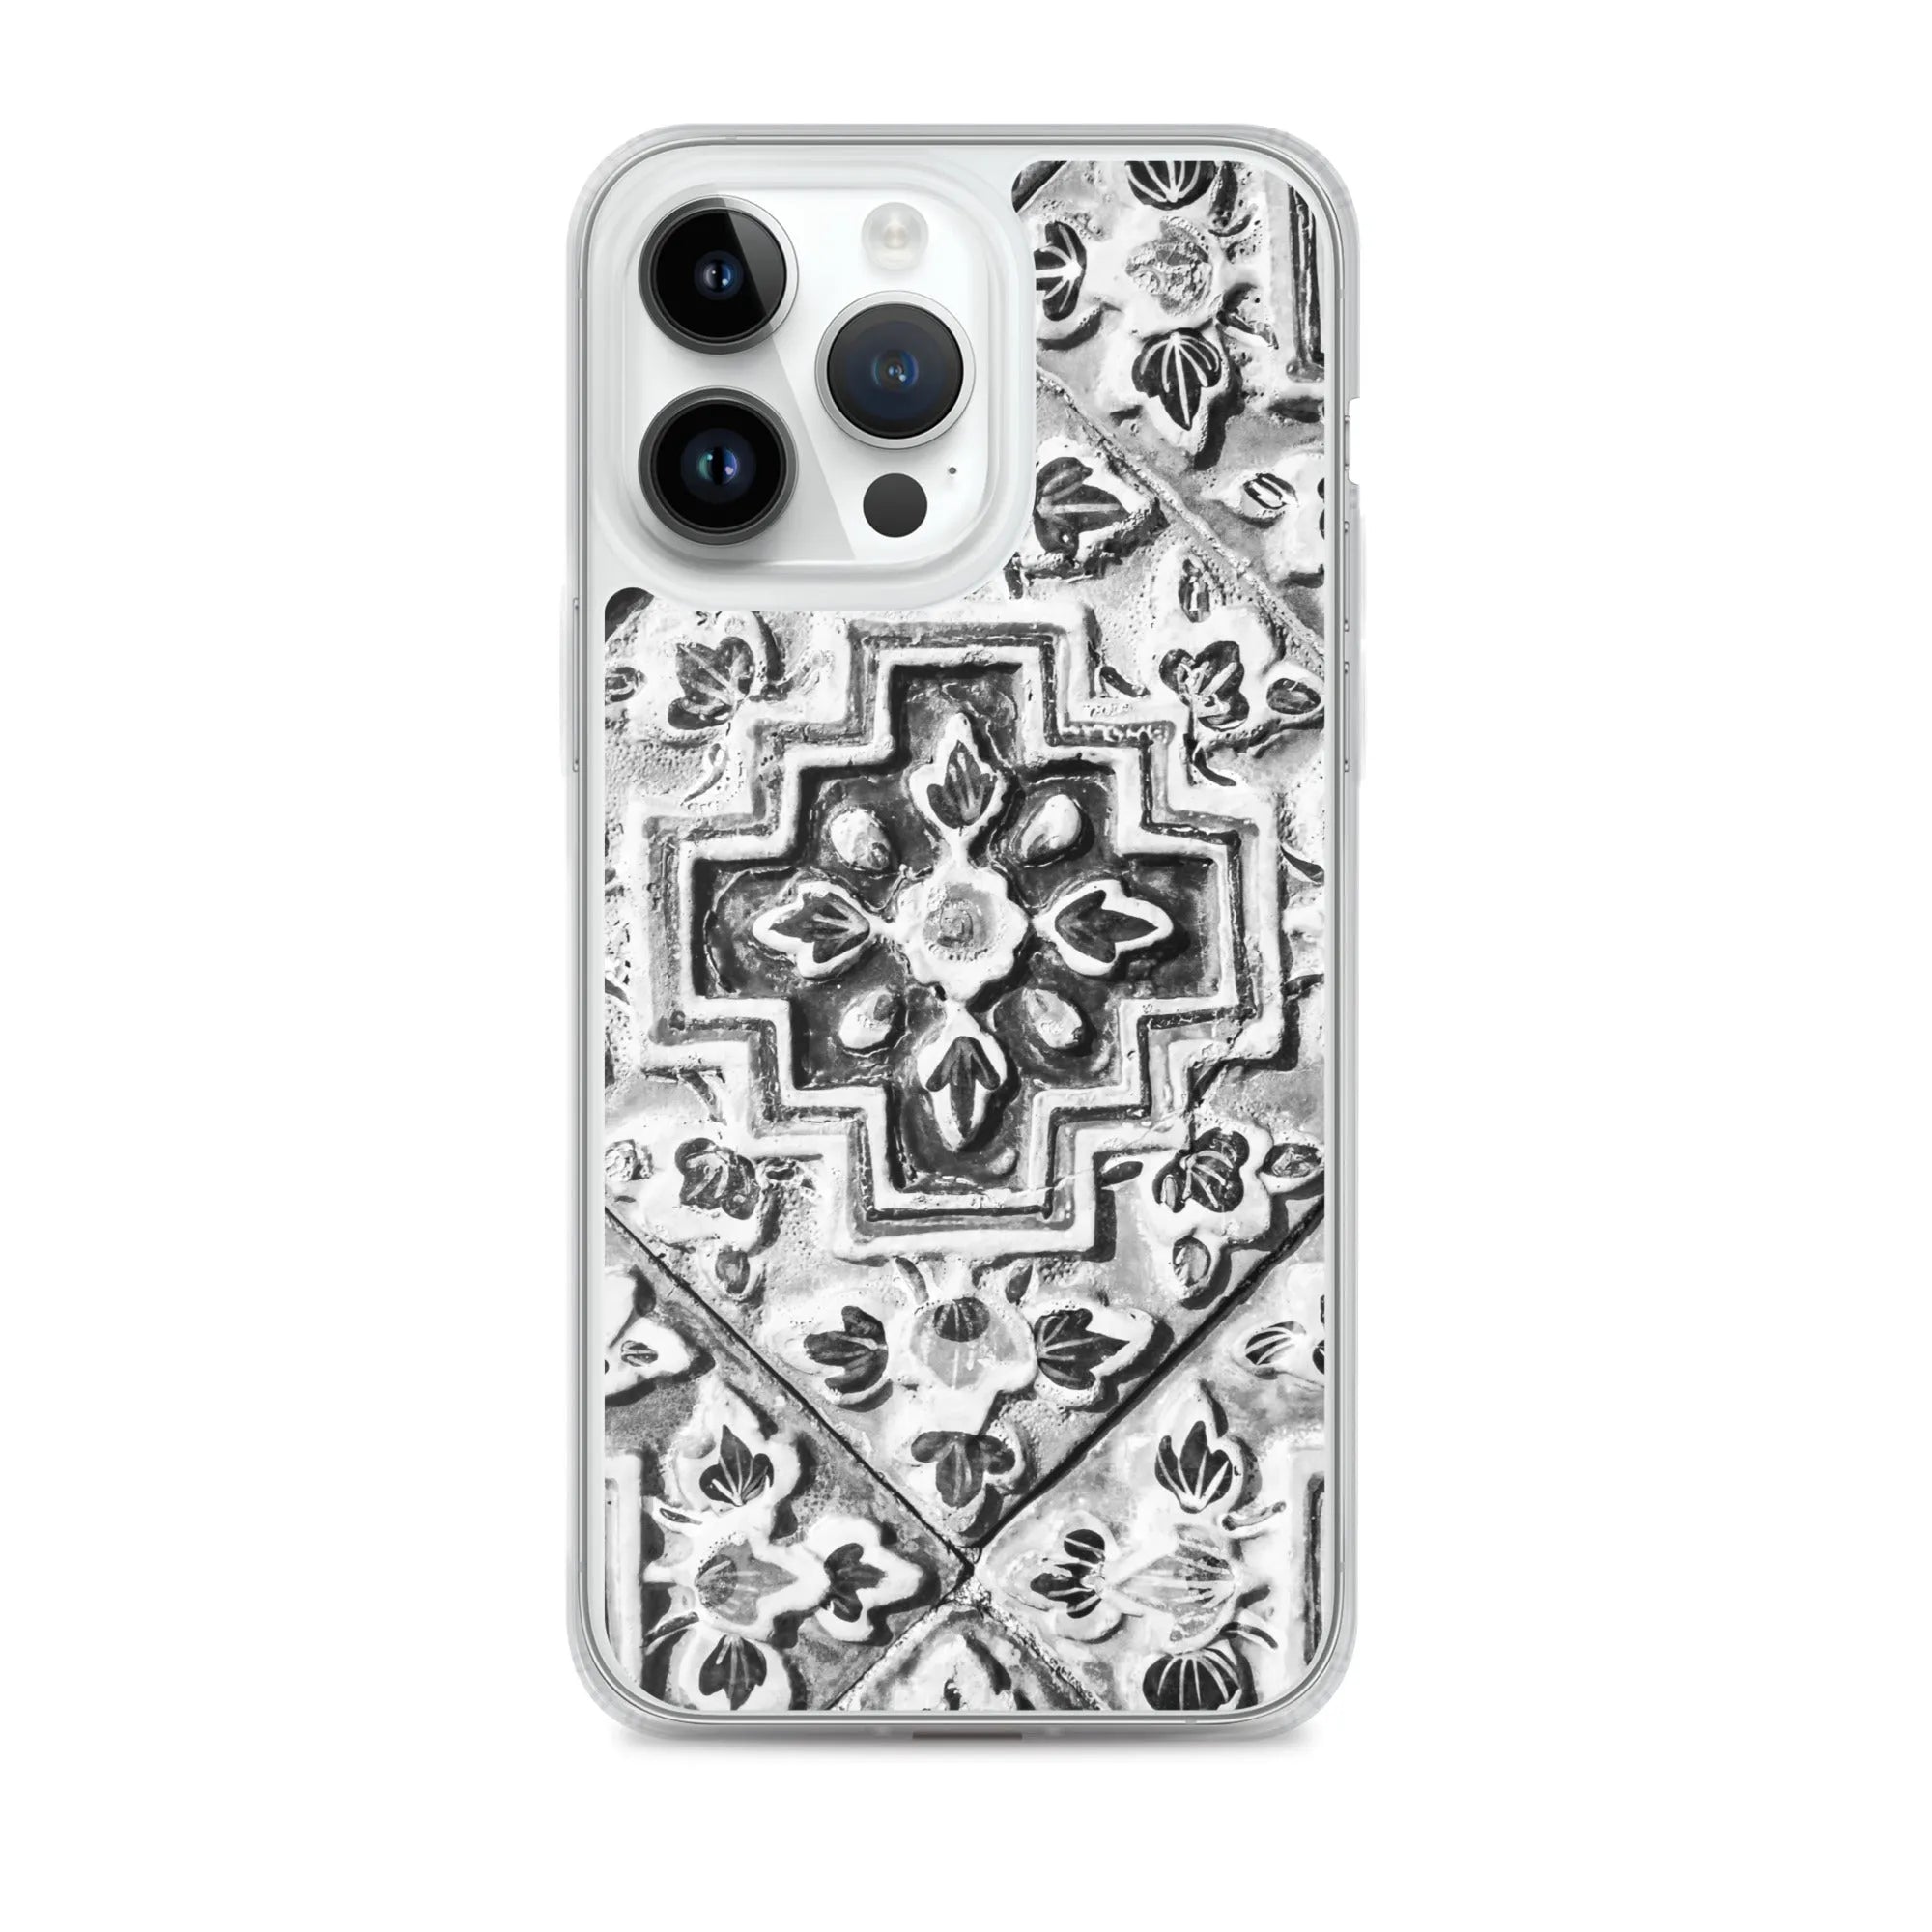 Tactile - Designer Travels Art Iphone Case - Black And White - Iphone 14 Pro Max - Mobile Phone Cases - Aesthetic Art